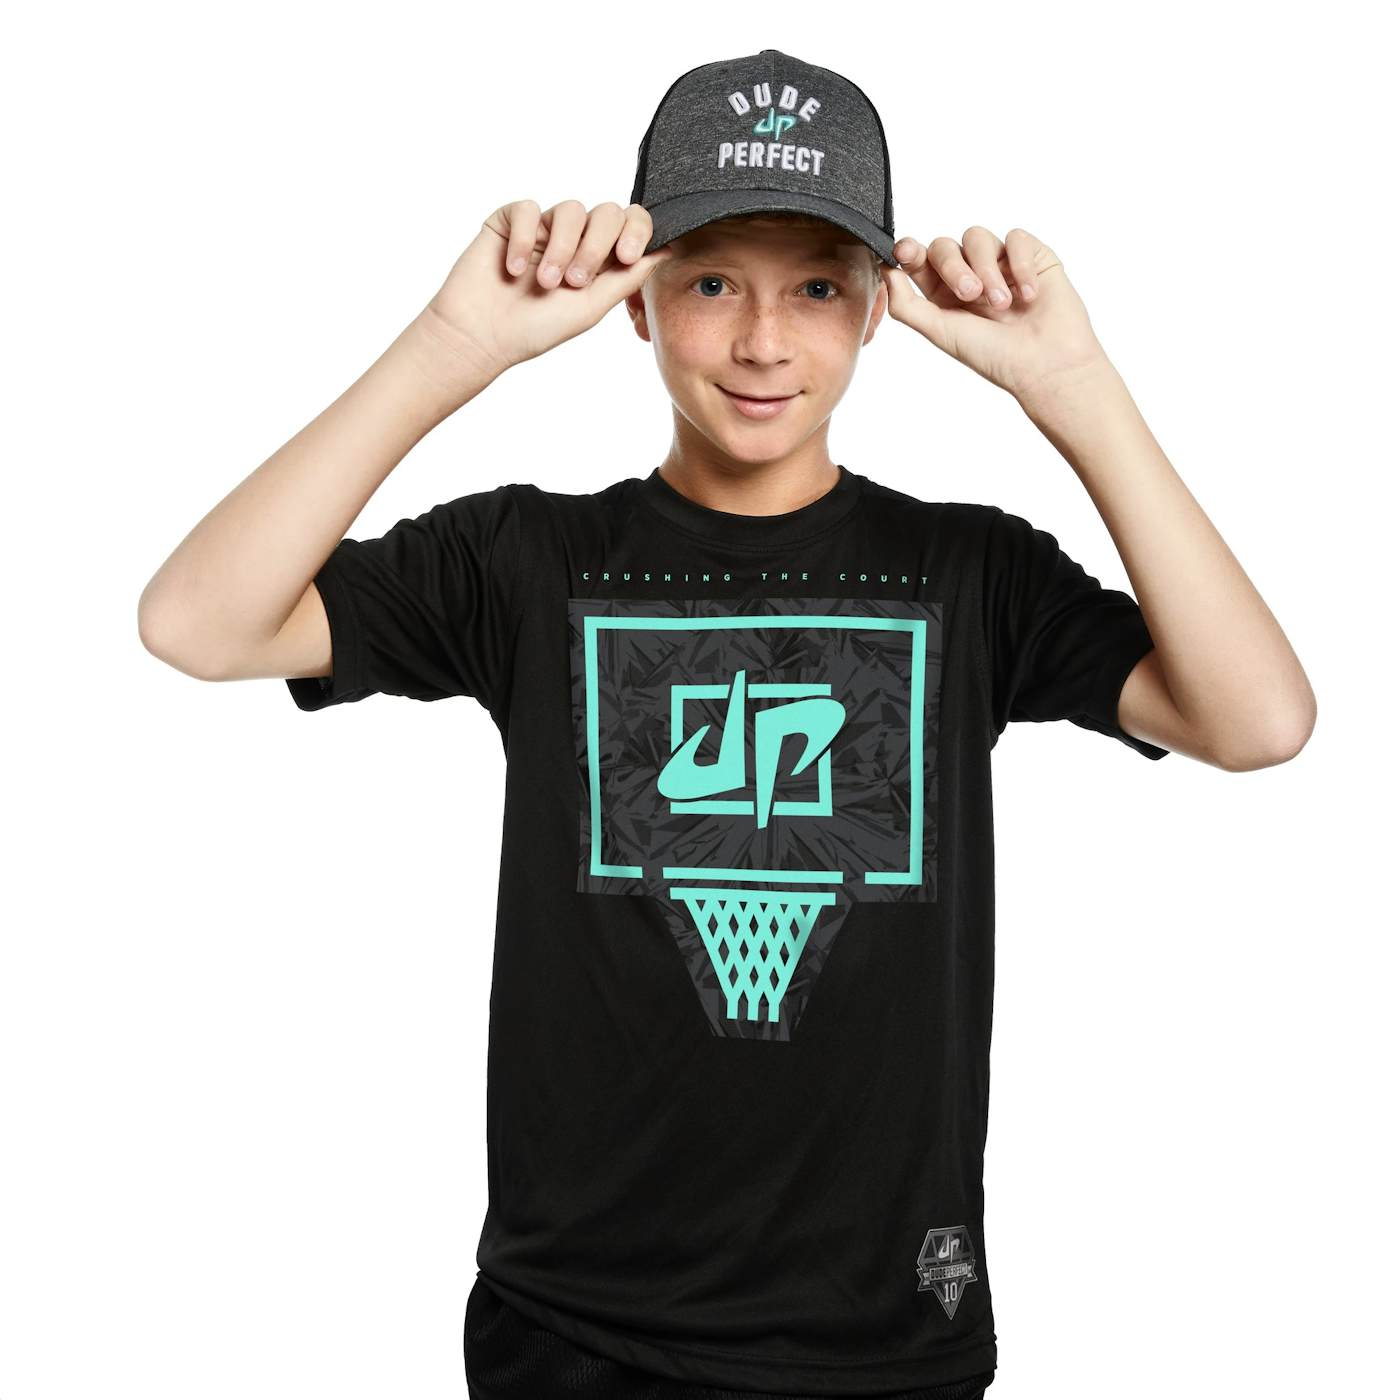 Dude Perfect Crushing The Court IV Performance Tee